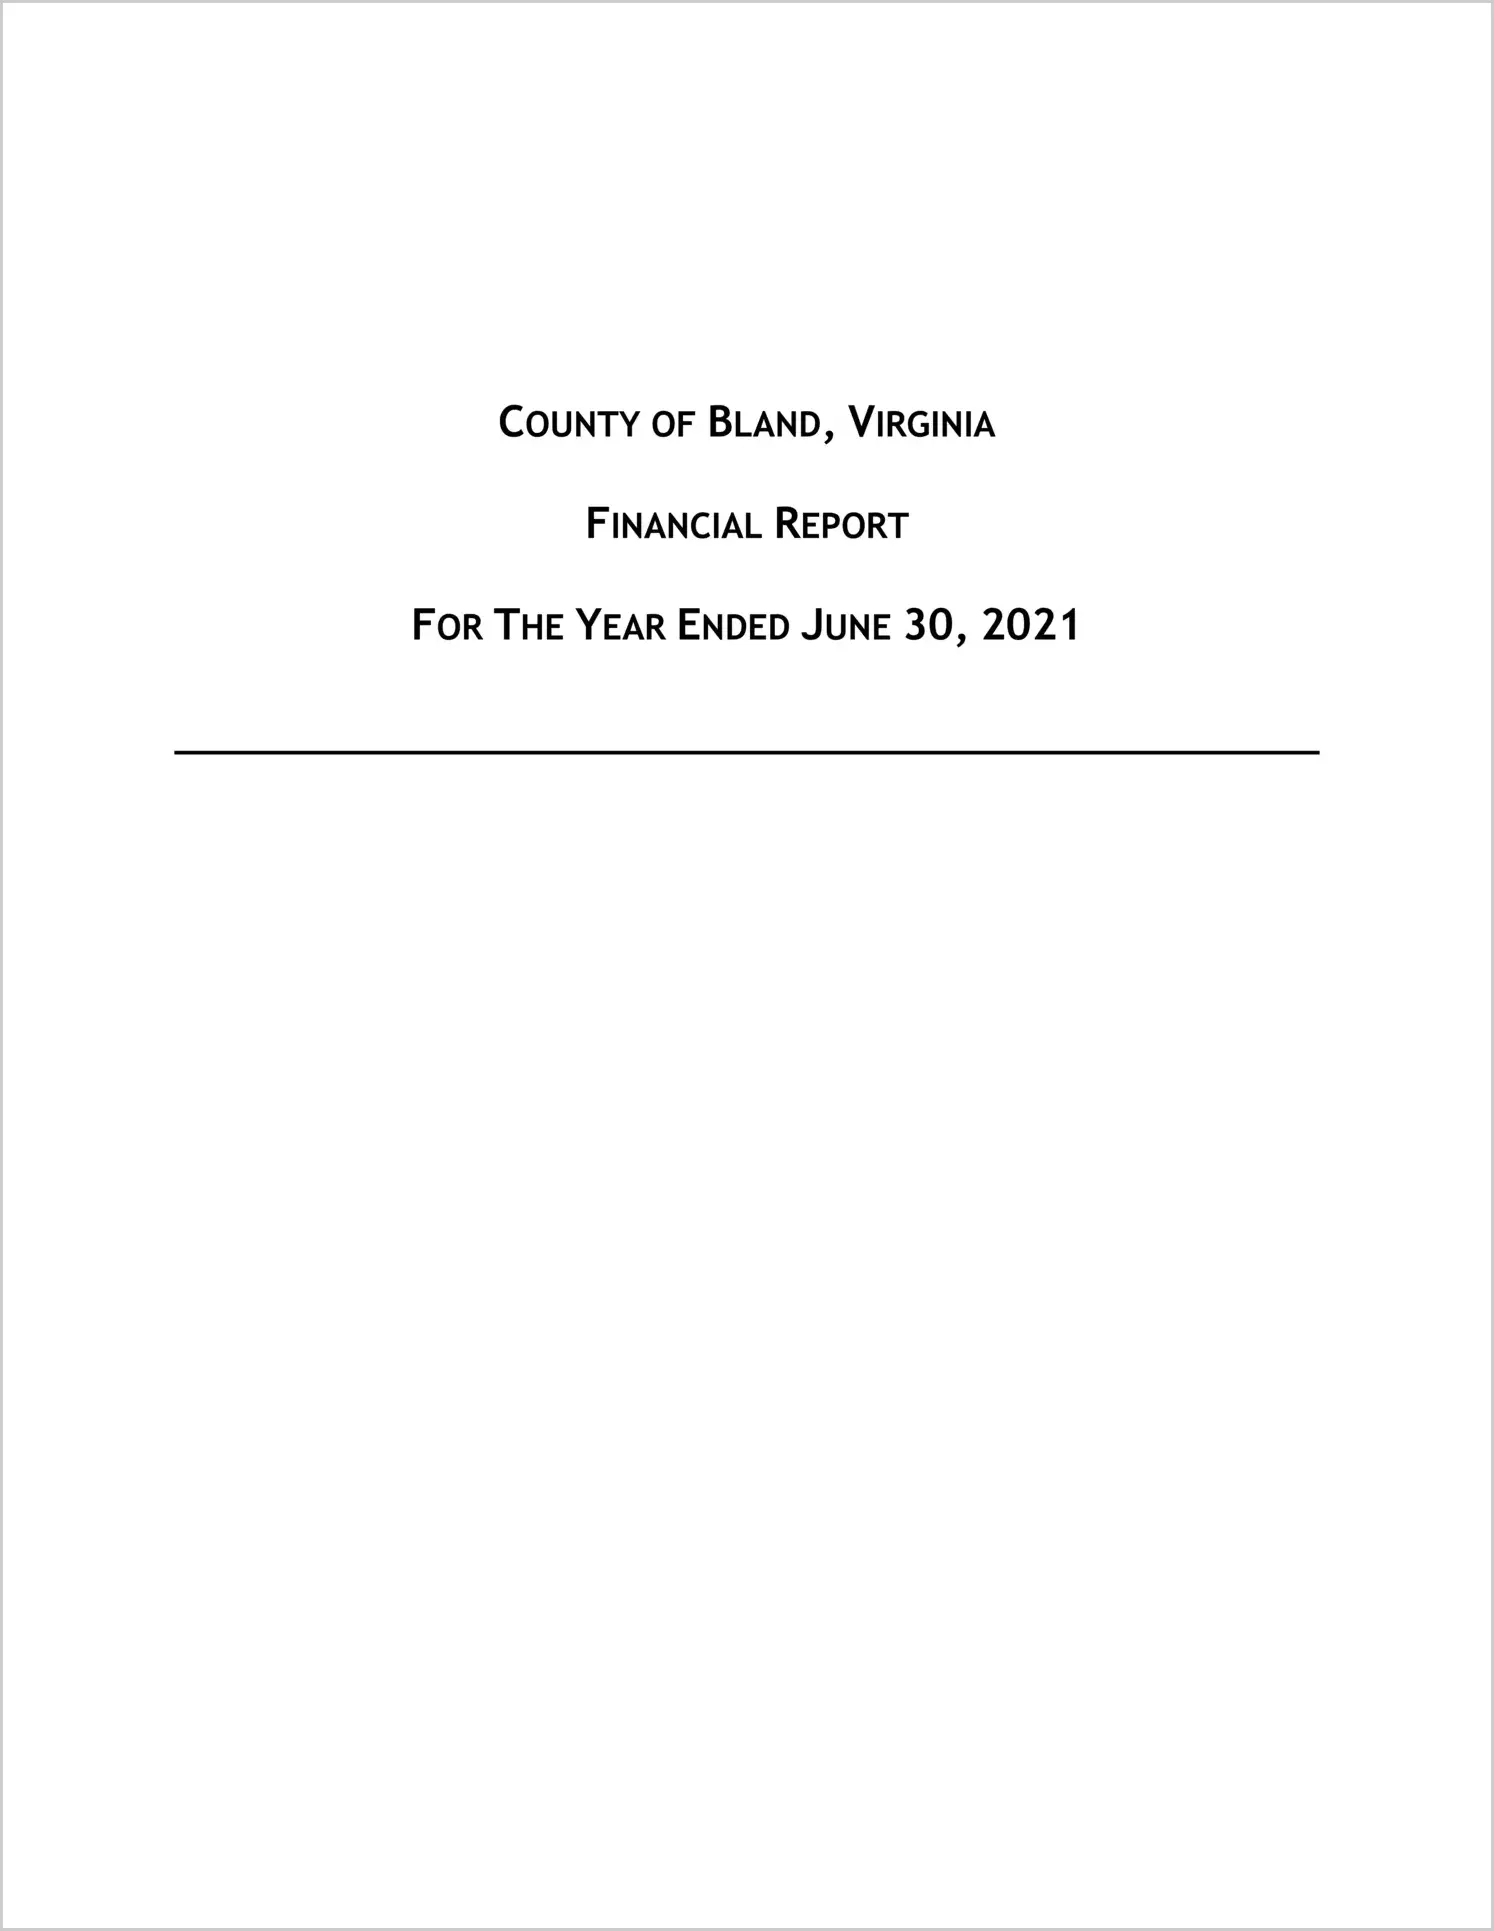 2021 Annual Financial Report for County of Bland